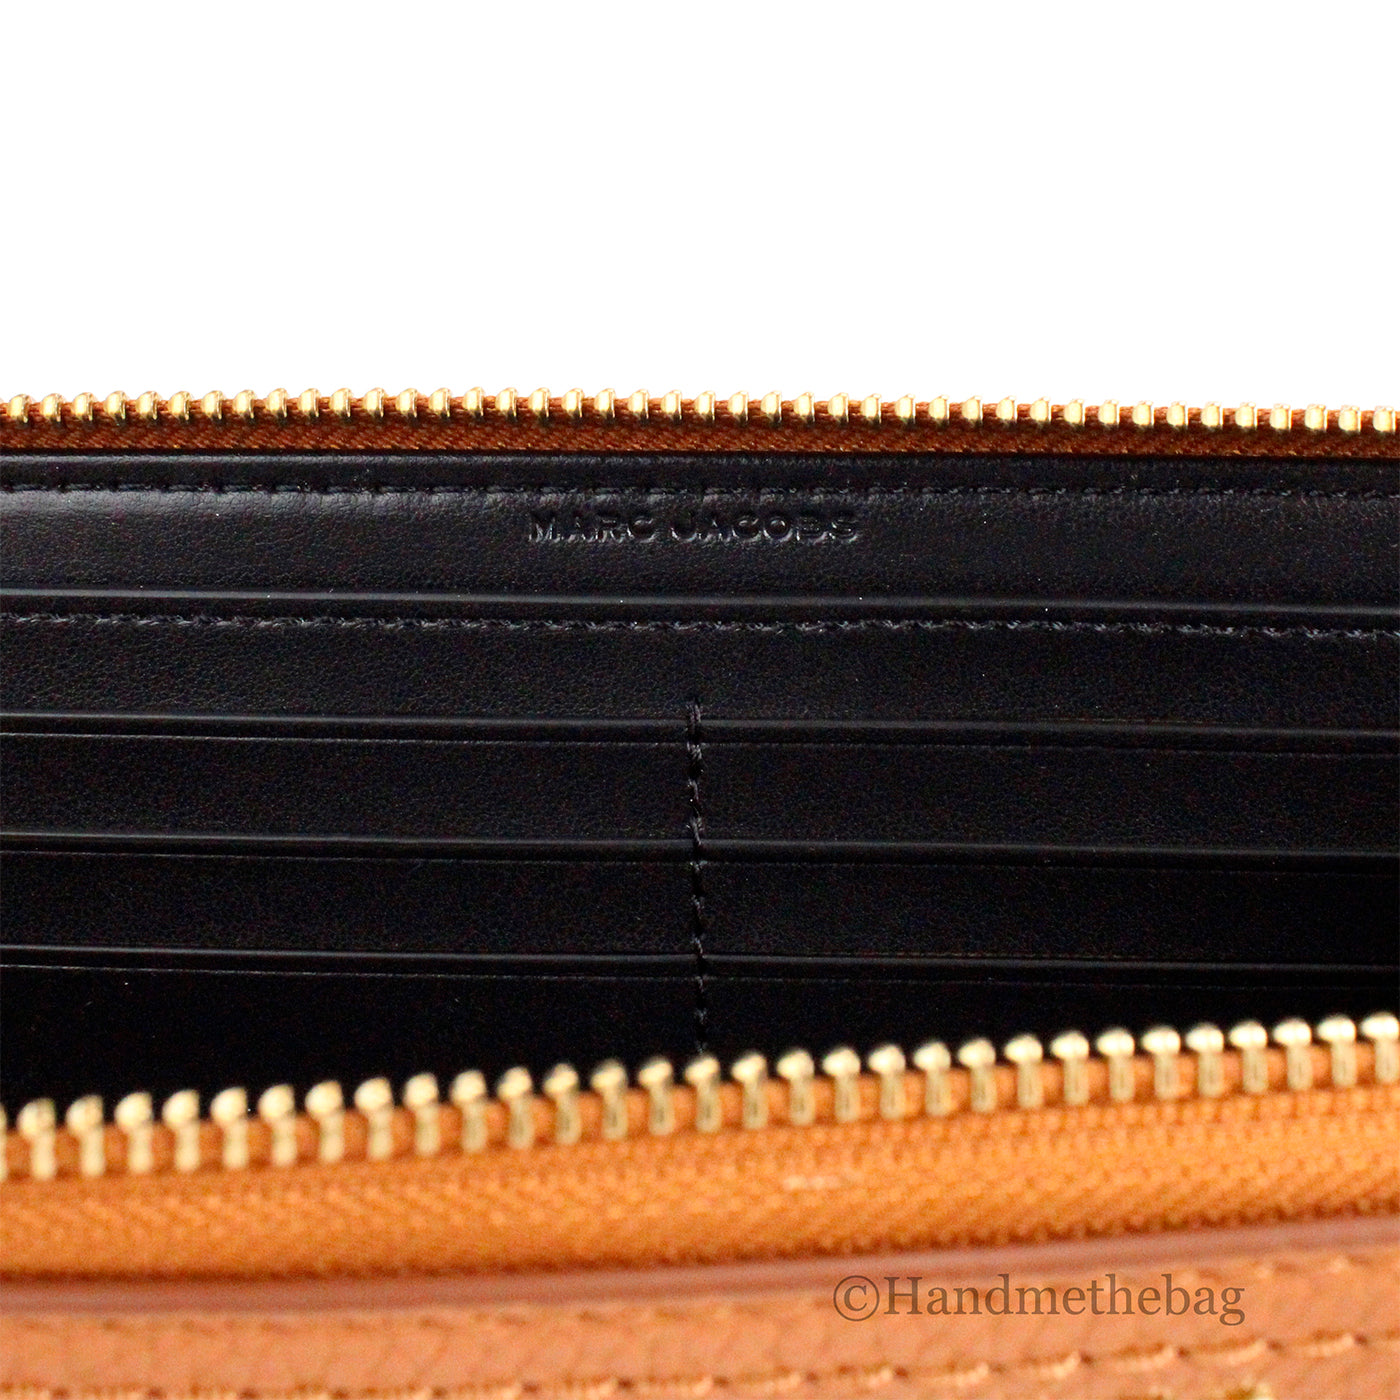 Marc Jacobs Large Smoked Almond Leather Continental Phone Wallet